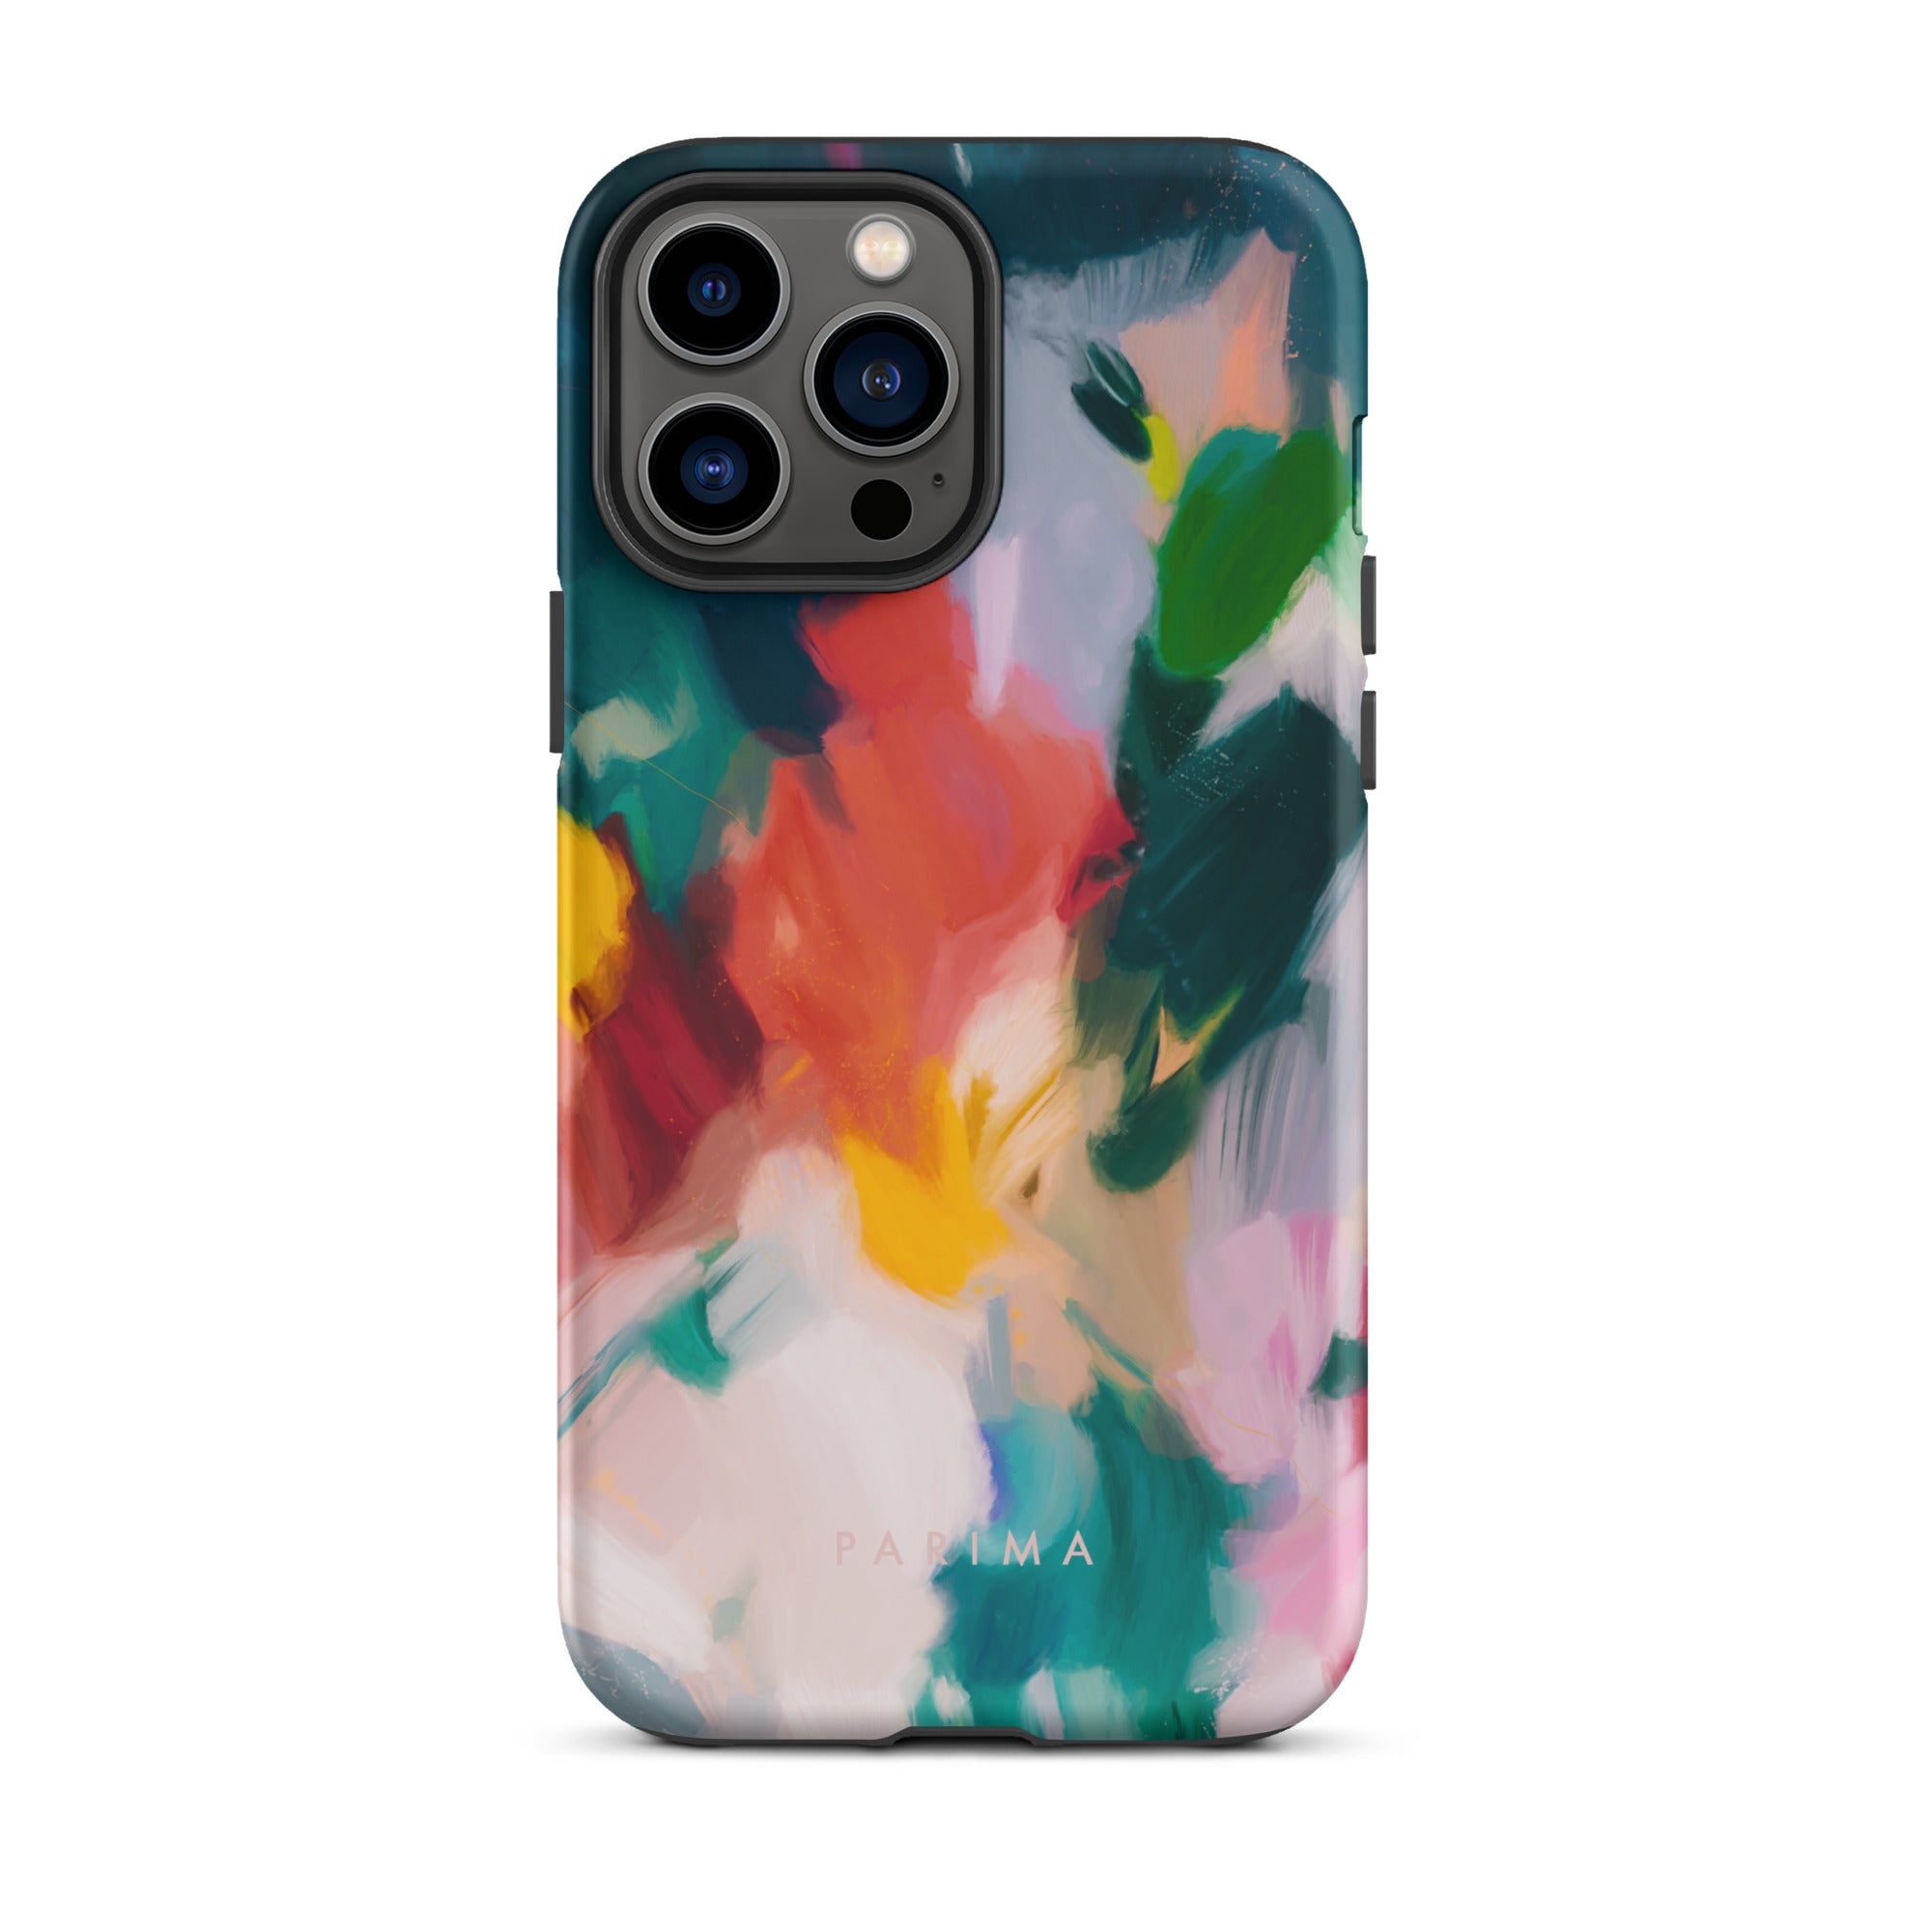 Pomme, blue and red abstract art on iPhone 13 Pro Max tough case by Parima Studio